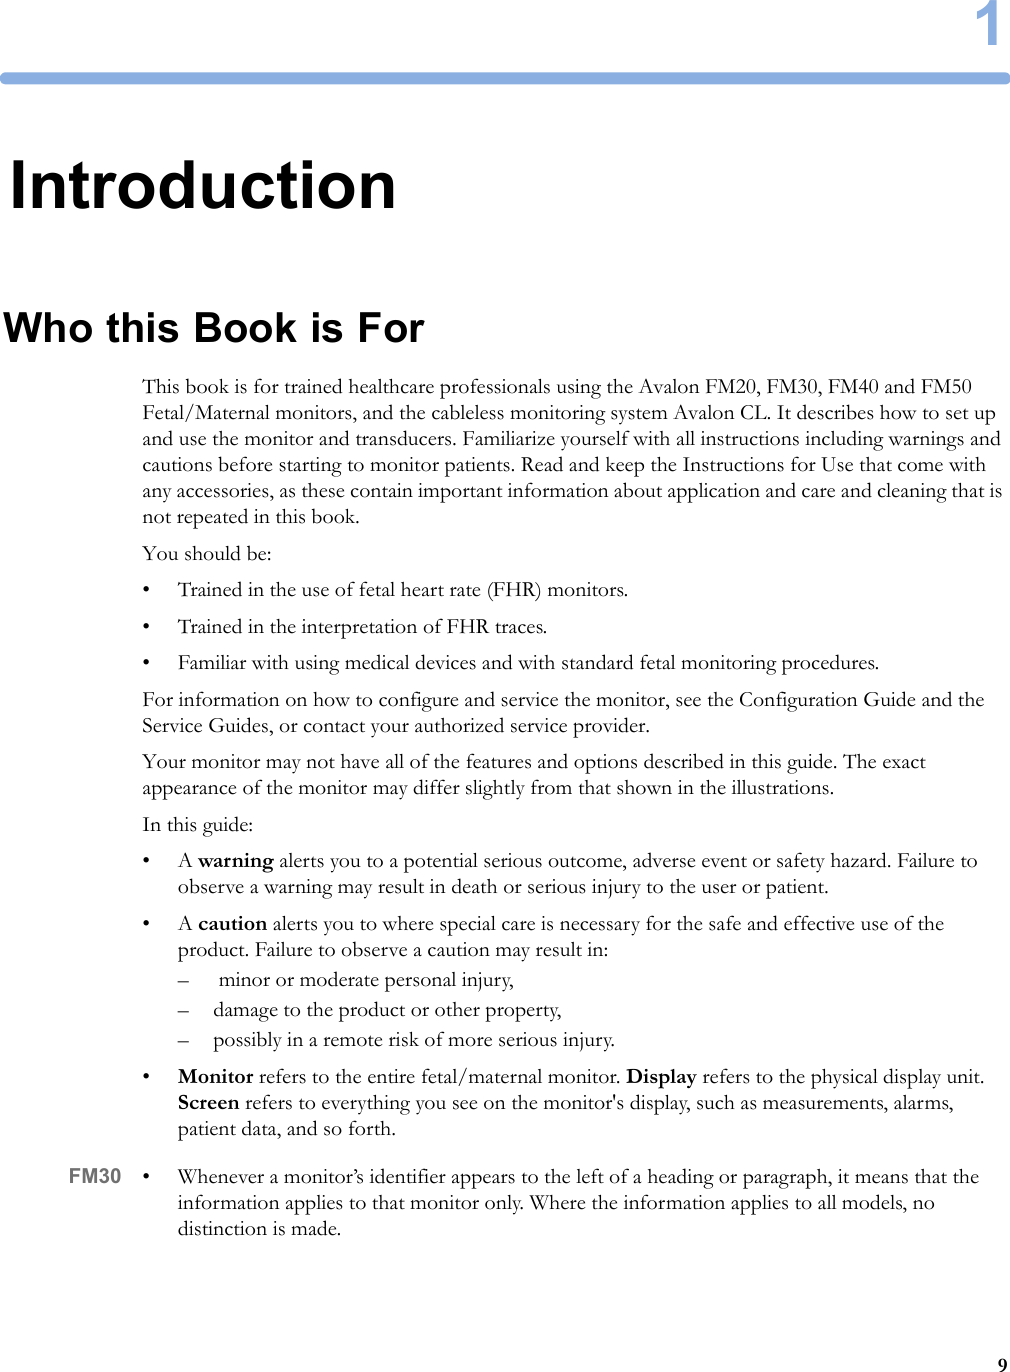 191IntroductionWho this Book is ForThis book is for trained healthcare professionals using the Avalon FM20, FM30, FM40 and FM50 Fetal/Maternal monitors, and the cableless monitoring system Avalon CL. It describes how to set up and use the monitor and transducers. Familiarize yourself with all instructions including warnings and cautions before starting to monitor patients. Read and keep the Instructions for Use that come with any accessories, as these contain important information about application and care and cleaning that is not repeated in this book.You should be:• Trained in the use of fetal heart rate (FHR) monitors.• Trained in the interpretation of FHR traces.• Familiar with using medical devices and with standard fetal monitoring procedures.For information on how to configure and service the monitor, see the Configuration Guide and the Service Guides, or contact your authorized service provider.Your monitor may not have all of the features and options described in this guide. The exact appearance of the monitor may differ slightly from that shown in the illustrations.In this guide:•A warning alerts you to a potential serious outcome, adverse event or safety hazard. Failure to observe a warning may result in death or serious injury to the user or patient.•A caution alerts you to where special care is necessary for the safe and effective use of the product. Failure to observe a caution may result in:–  minor or moderate personal injury,– damage to the product or other property,– possibly in a remote risk of more serious injury.•Monitor refers to the entire fetal/maternal monitor. Display refers to the physical display unit. Screen refers to everything you see on the monitor&apos;s display, such as measurements, alarms, patient data, and so forth.FM30 • Whenever a monitor’s identifier appears to the left of a heading or paragraph, it means that the information applies to that monitor only. Where the information applies to all models, no distinction is made.